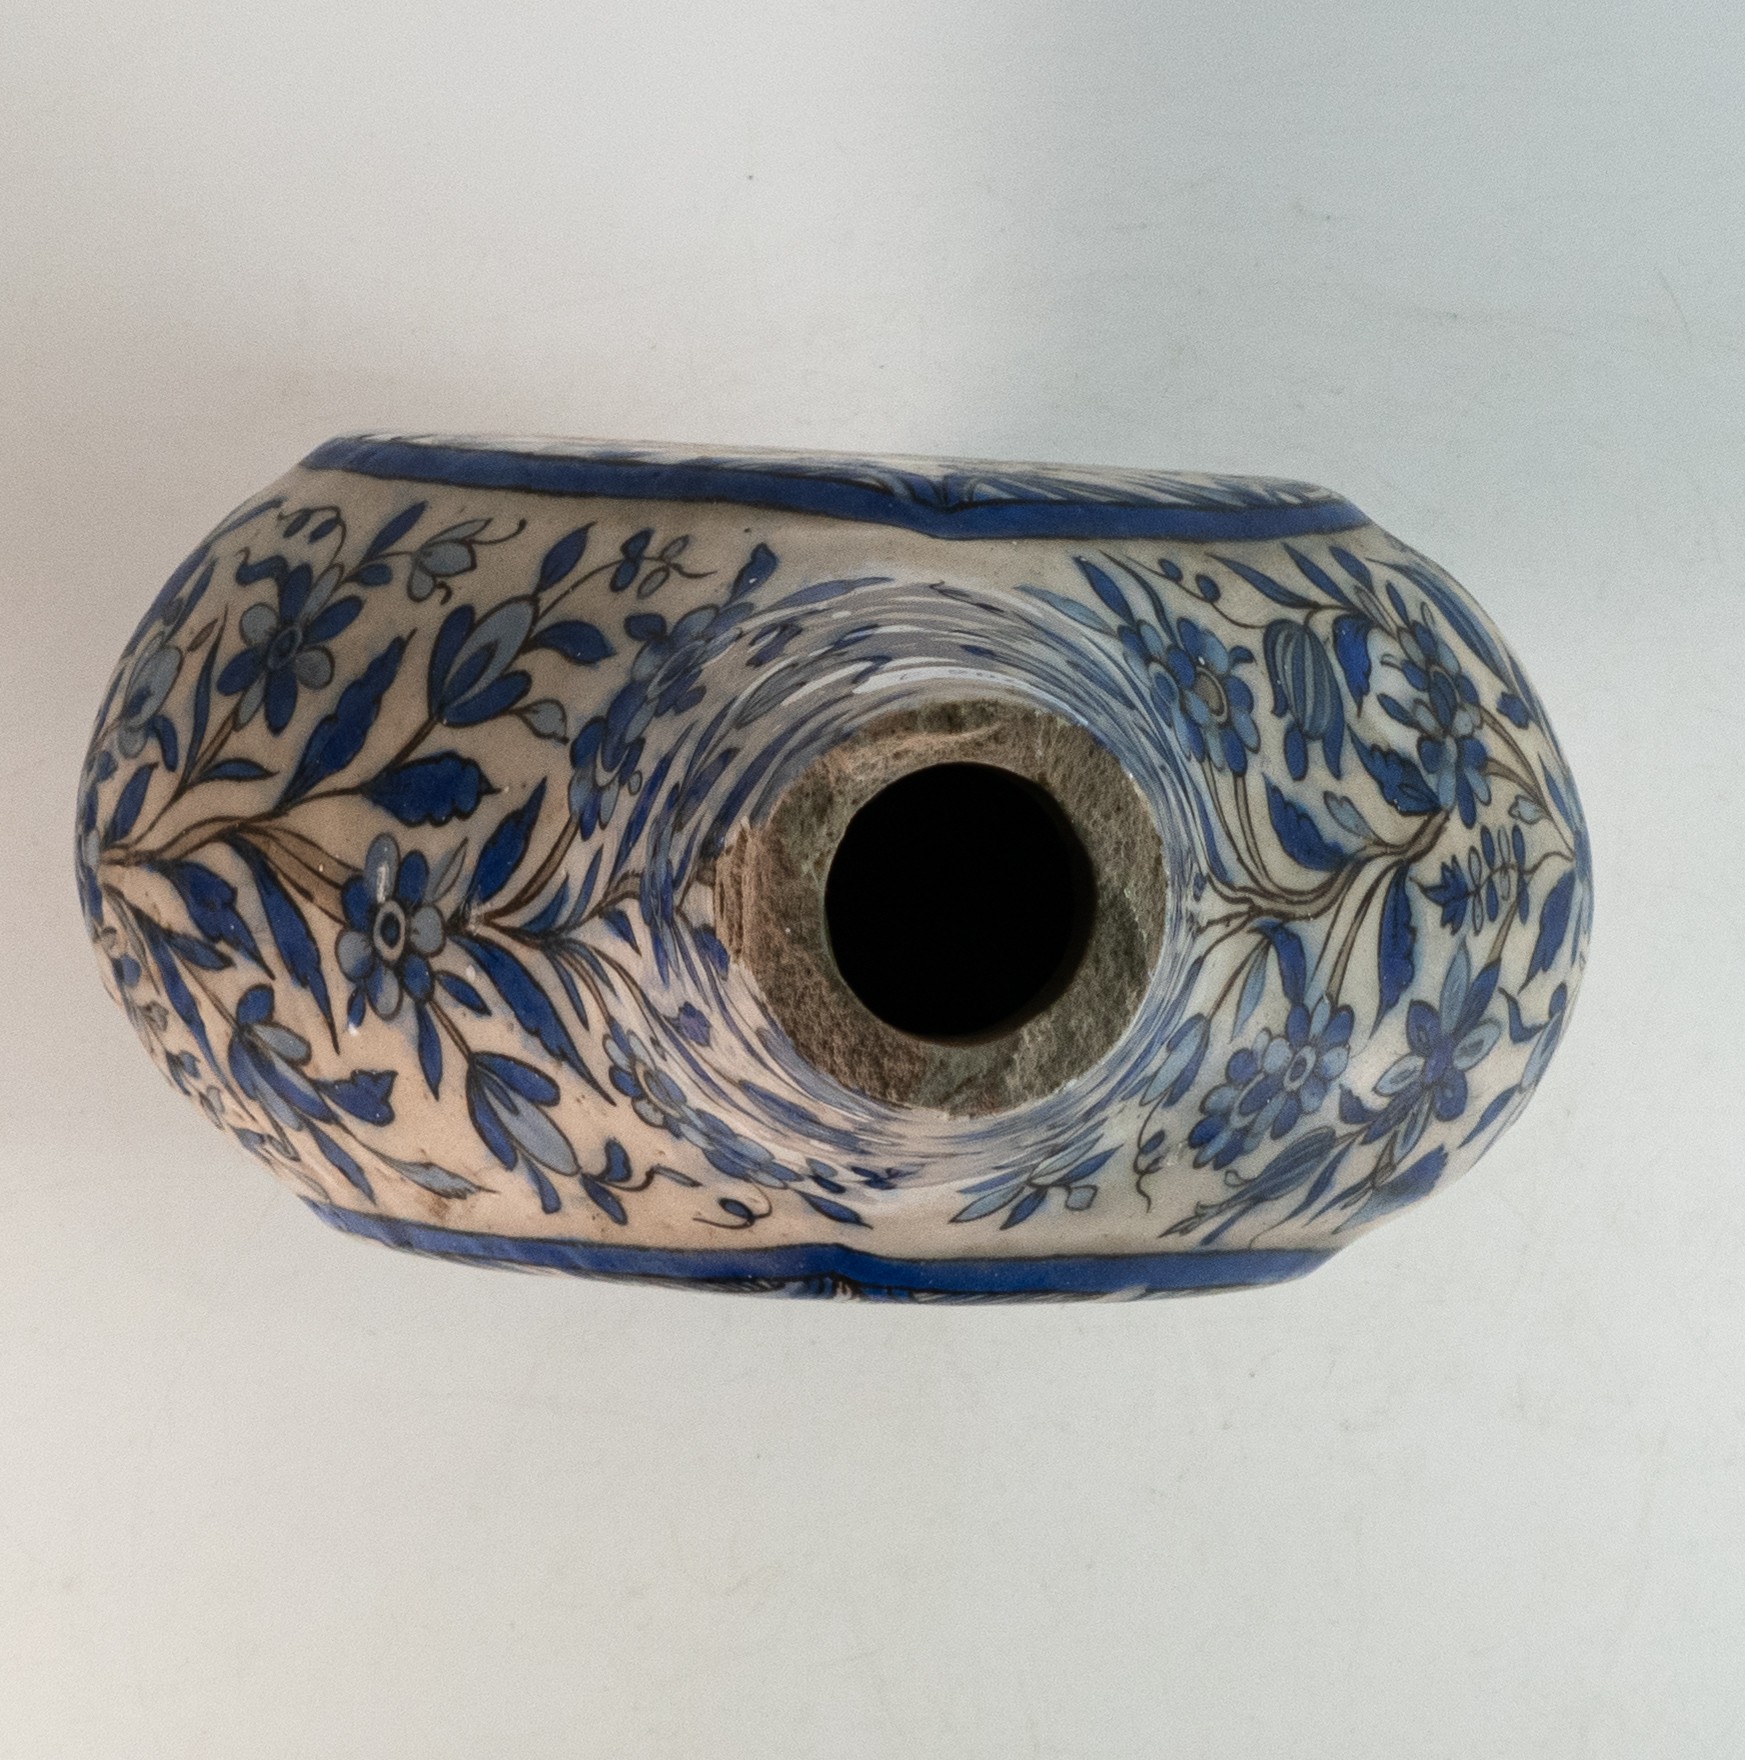 16th century Persian pottery vase. Floral and arboreal decoration in monochrome blue and grey - Bild 3 aus 7